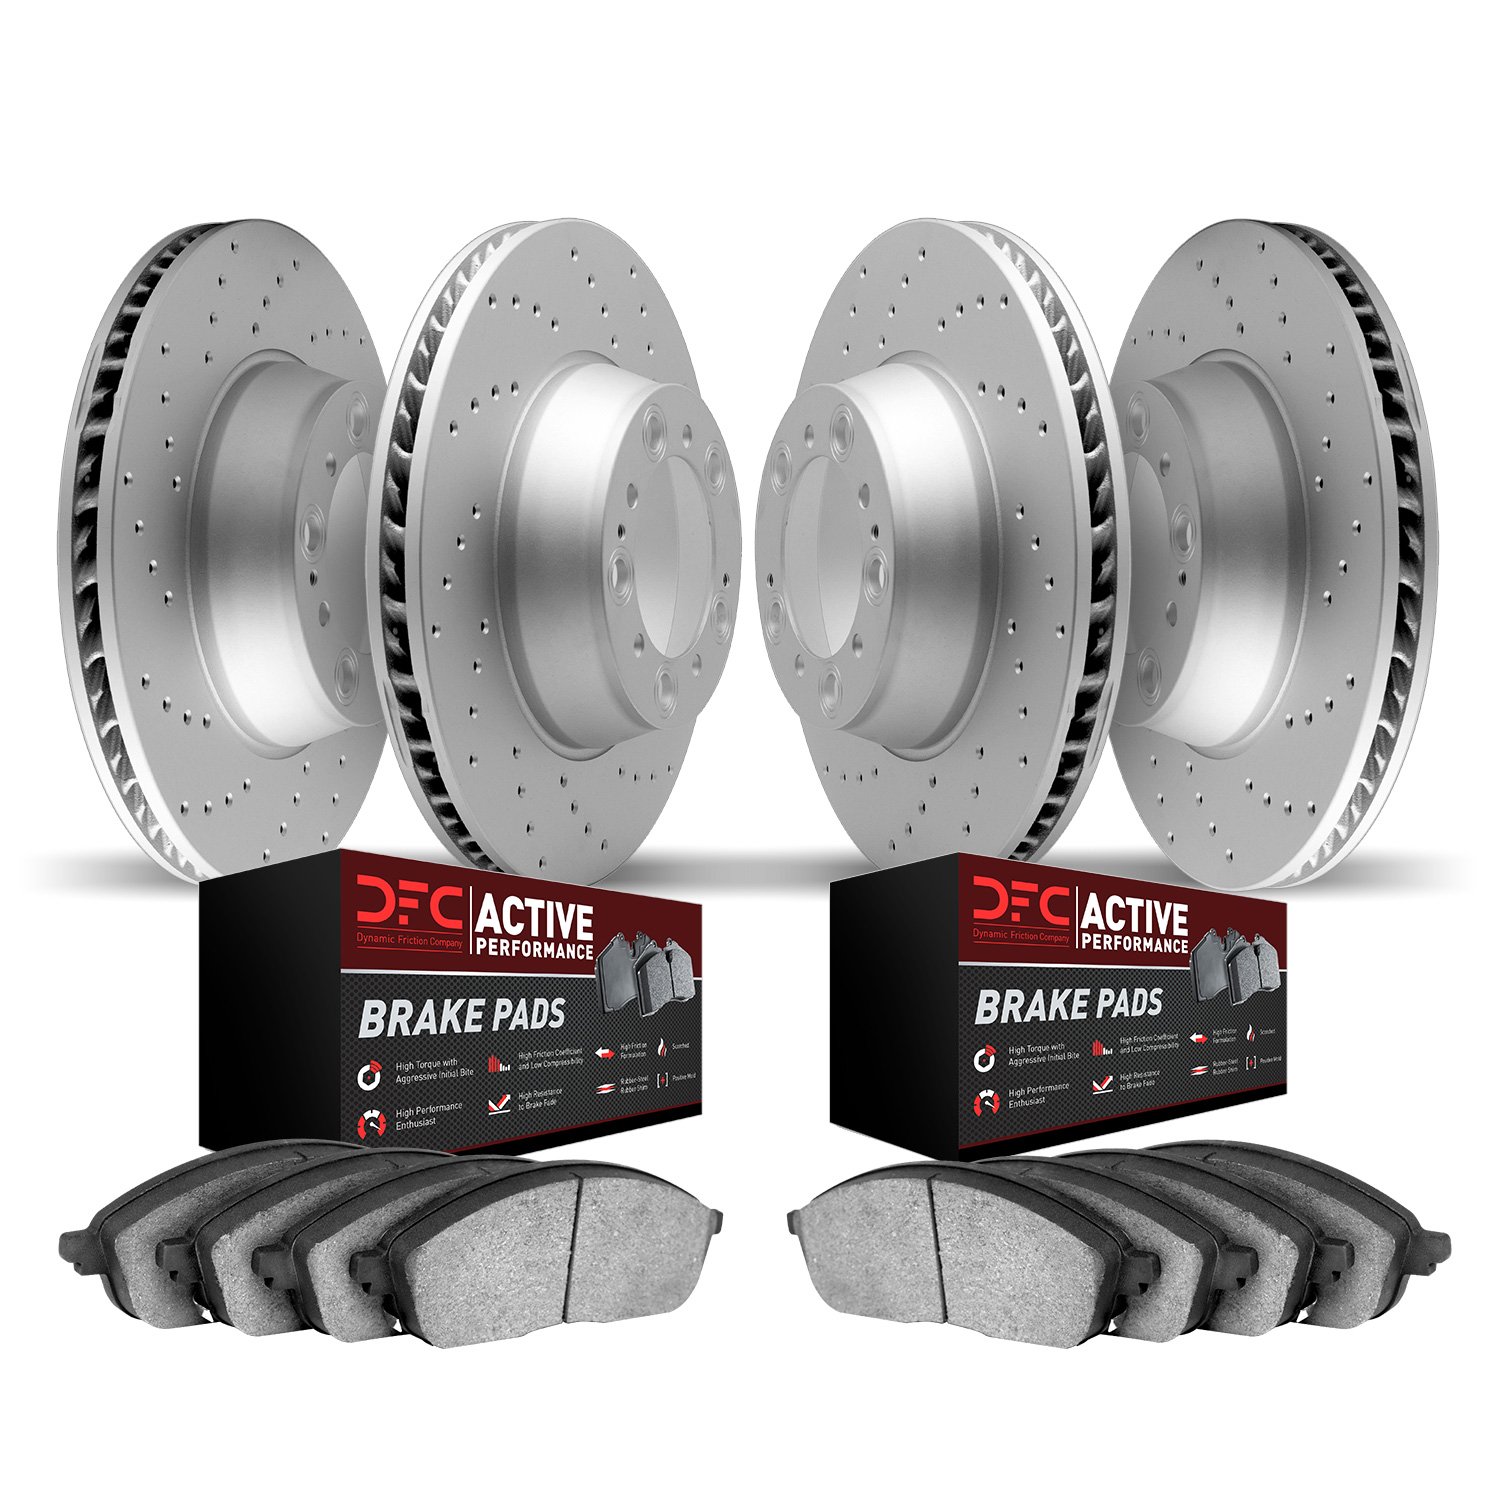 2704-68003 Geoperformance Drilled Brake Rotors with Active Performance Pads Kit, 2007-2015 Infiniti/Nissan, Position: Front and